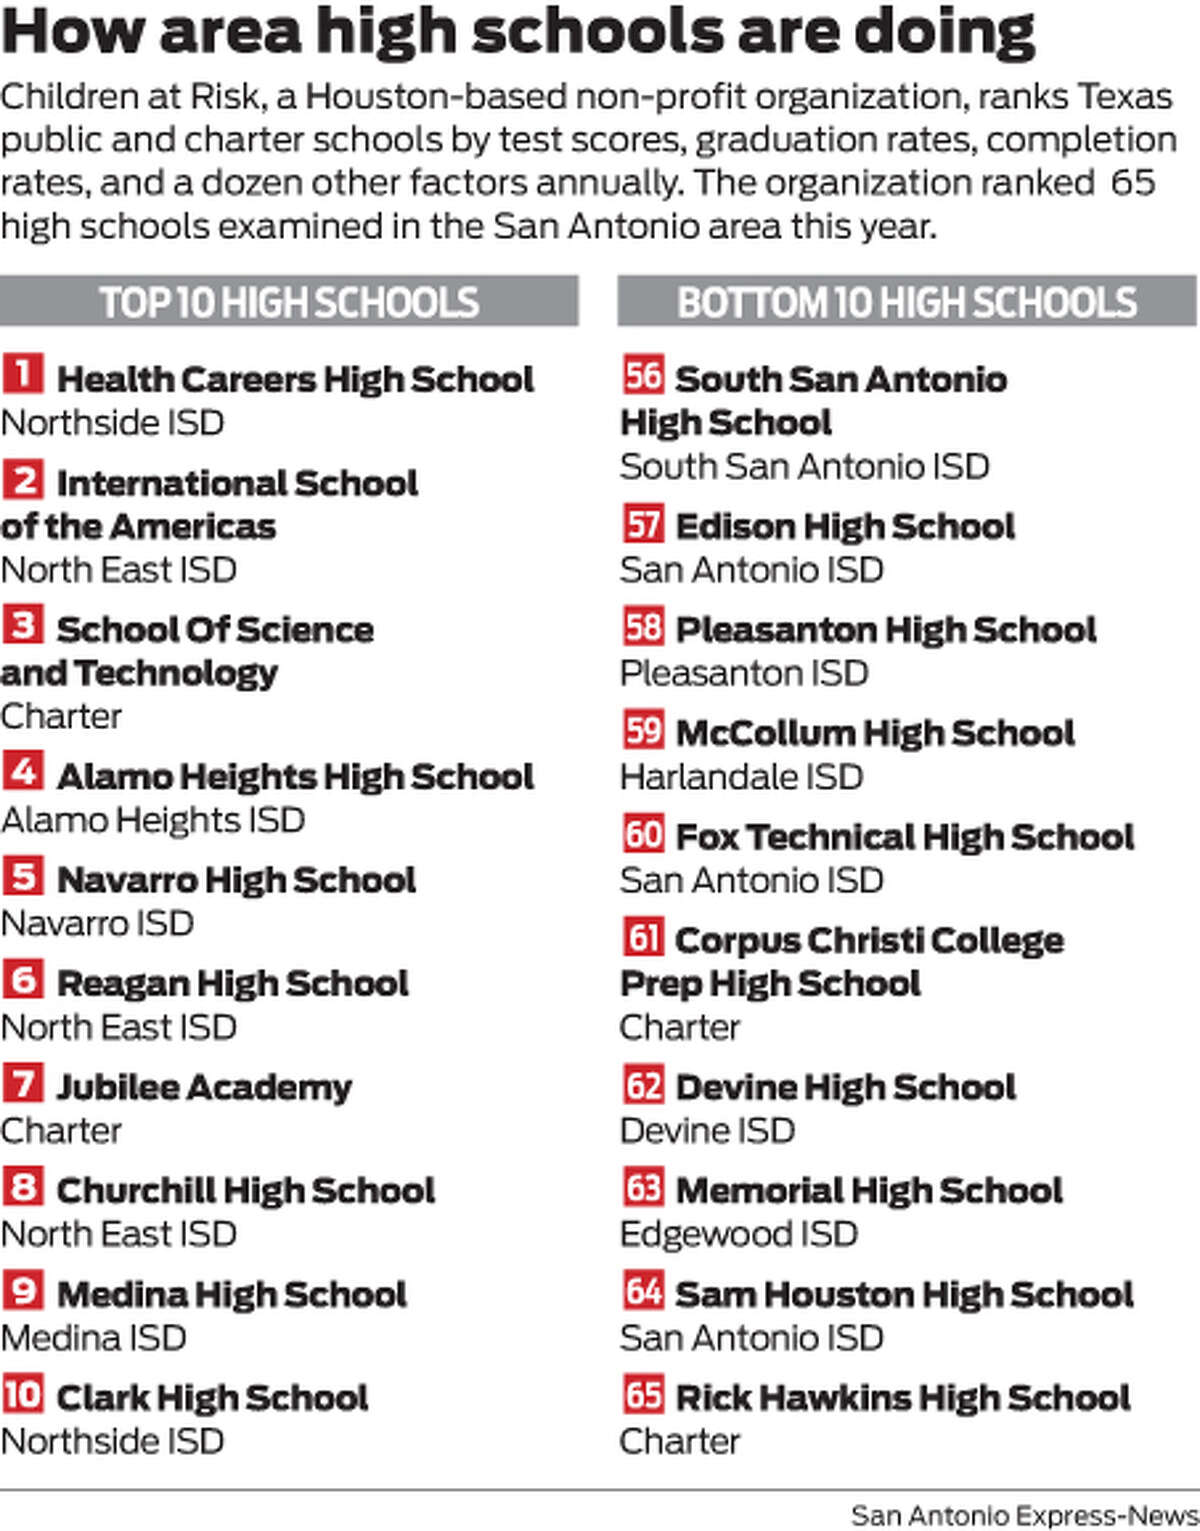 How area high schools are doing Children at Risk, a Houston-based non-profit organization, ranks Texas public and charter schools by test scores, graduation rates, completion rates, and a dozen other factors annually. The organization ranked 65 high schools examined in the San Antonio area this year.